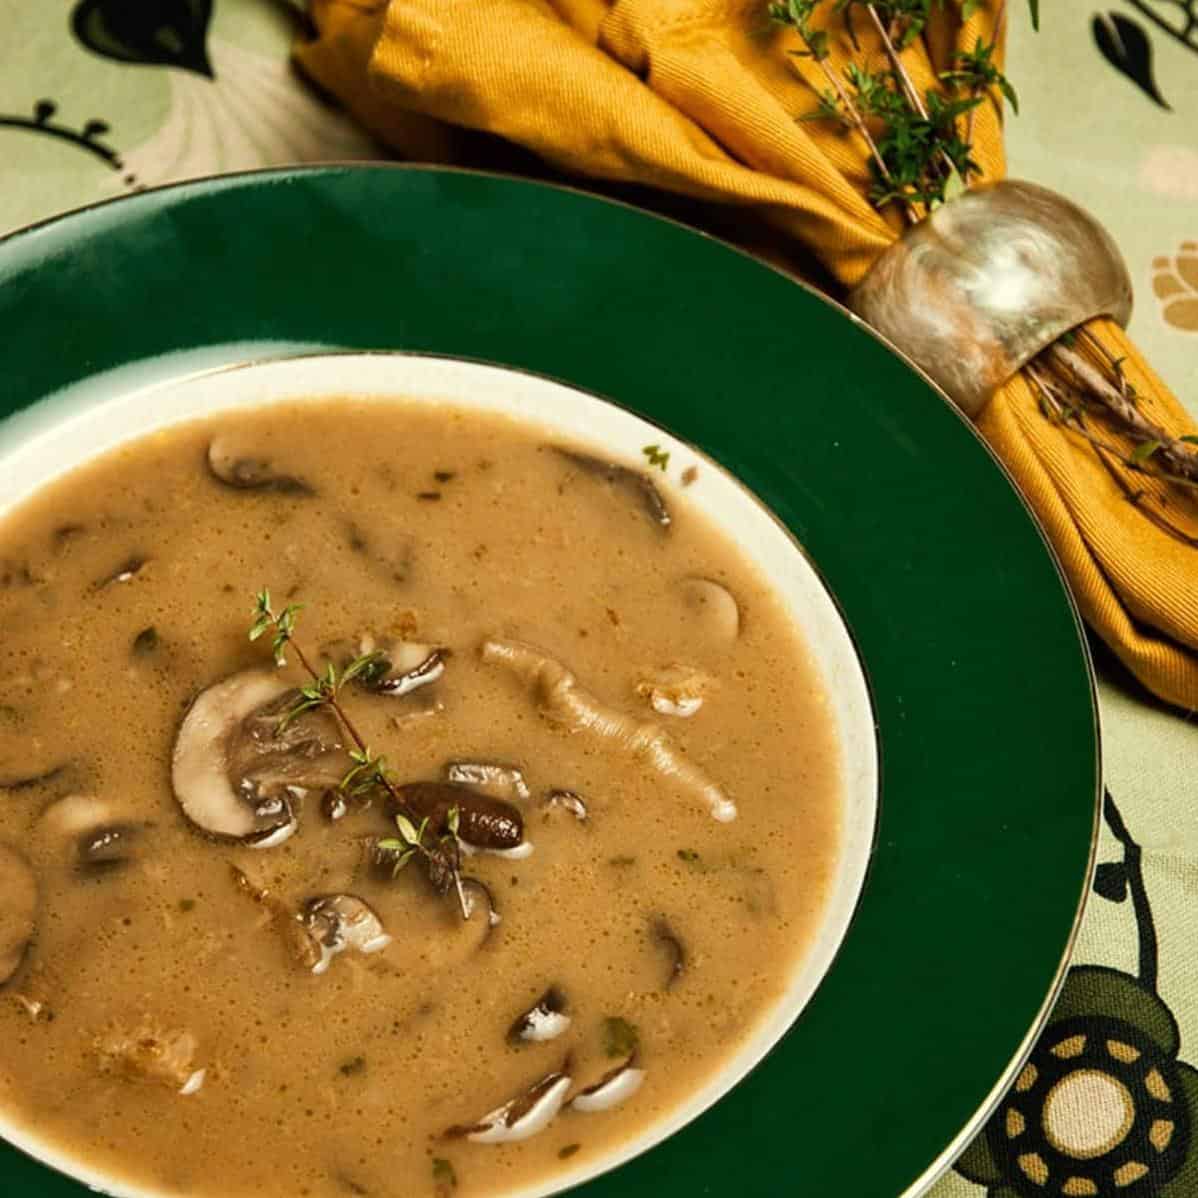  This soup is loaded with earthy flavors and aroma from the mix of wild mushrooms.